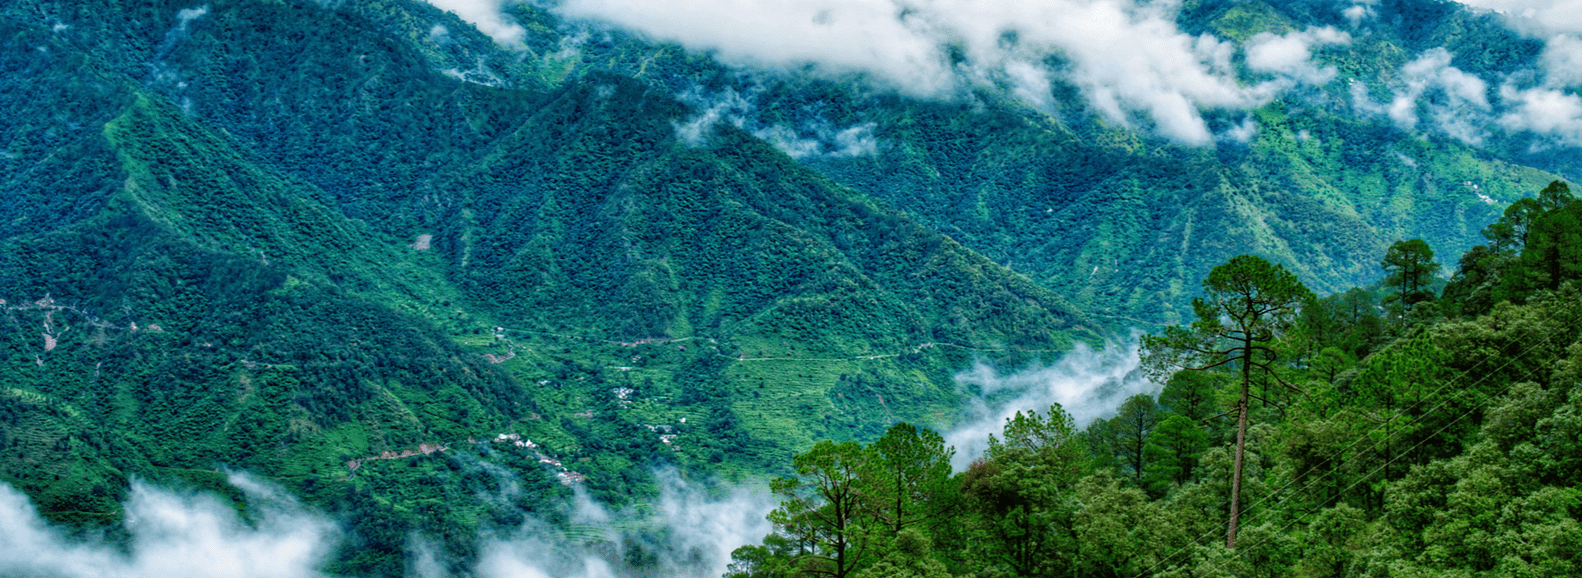 Lansdowne hillstation is one of the tourist places in uttarakhand with breathtaking hill views and green valley